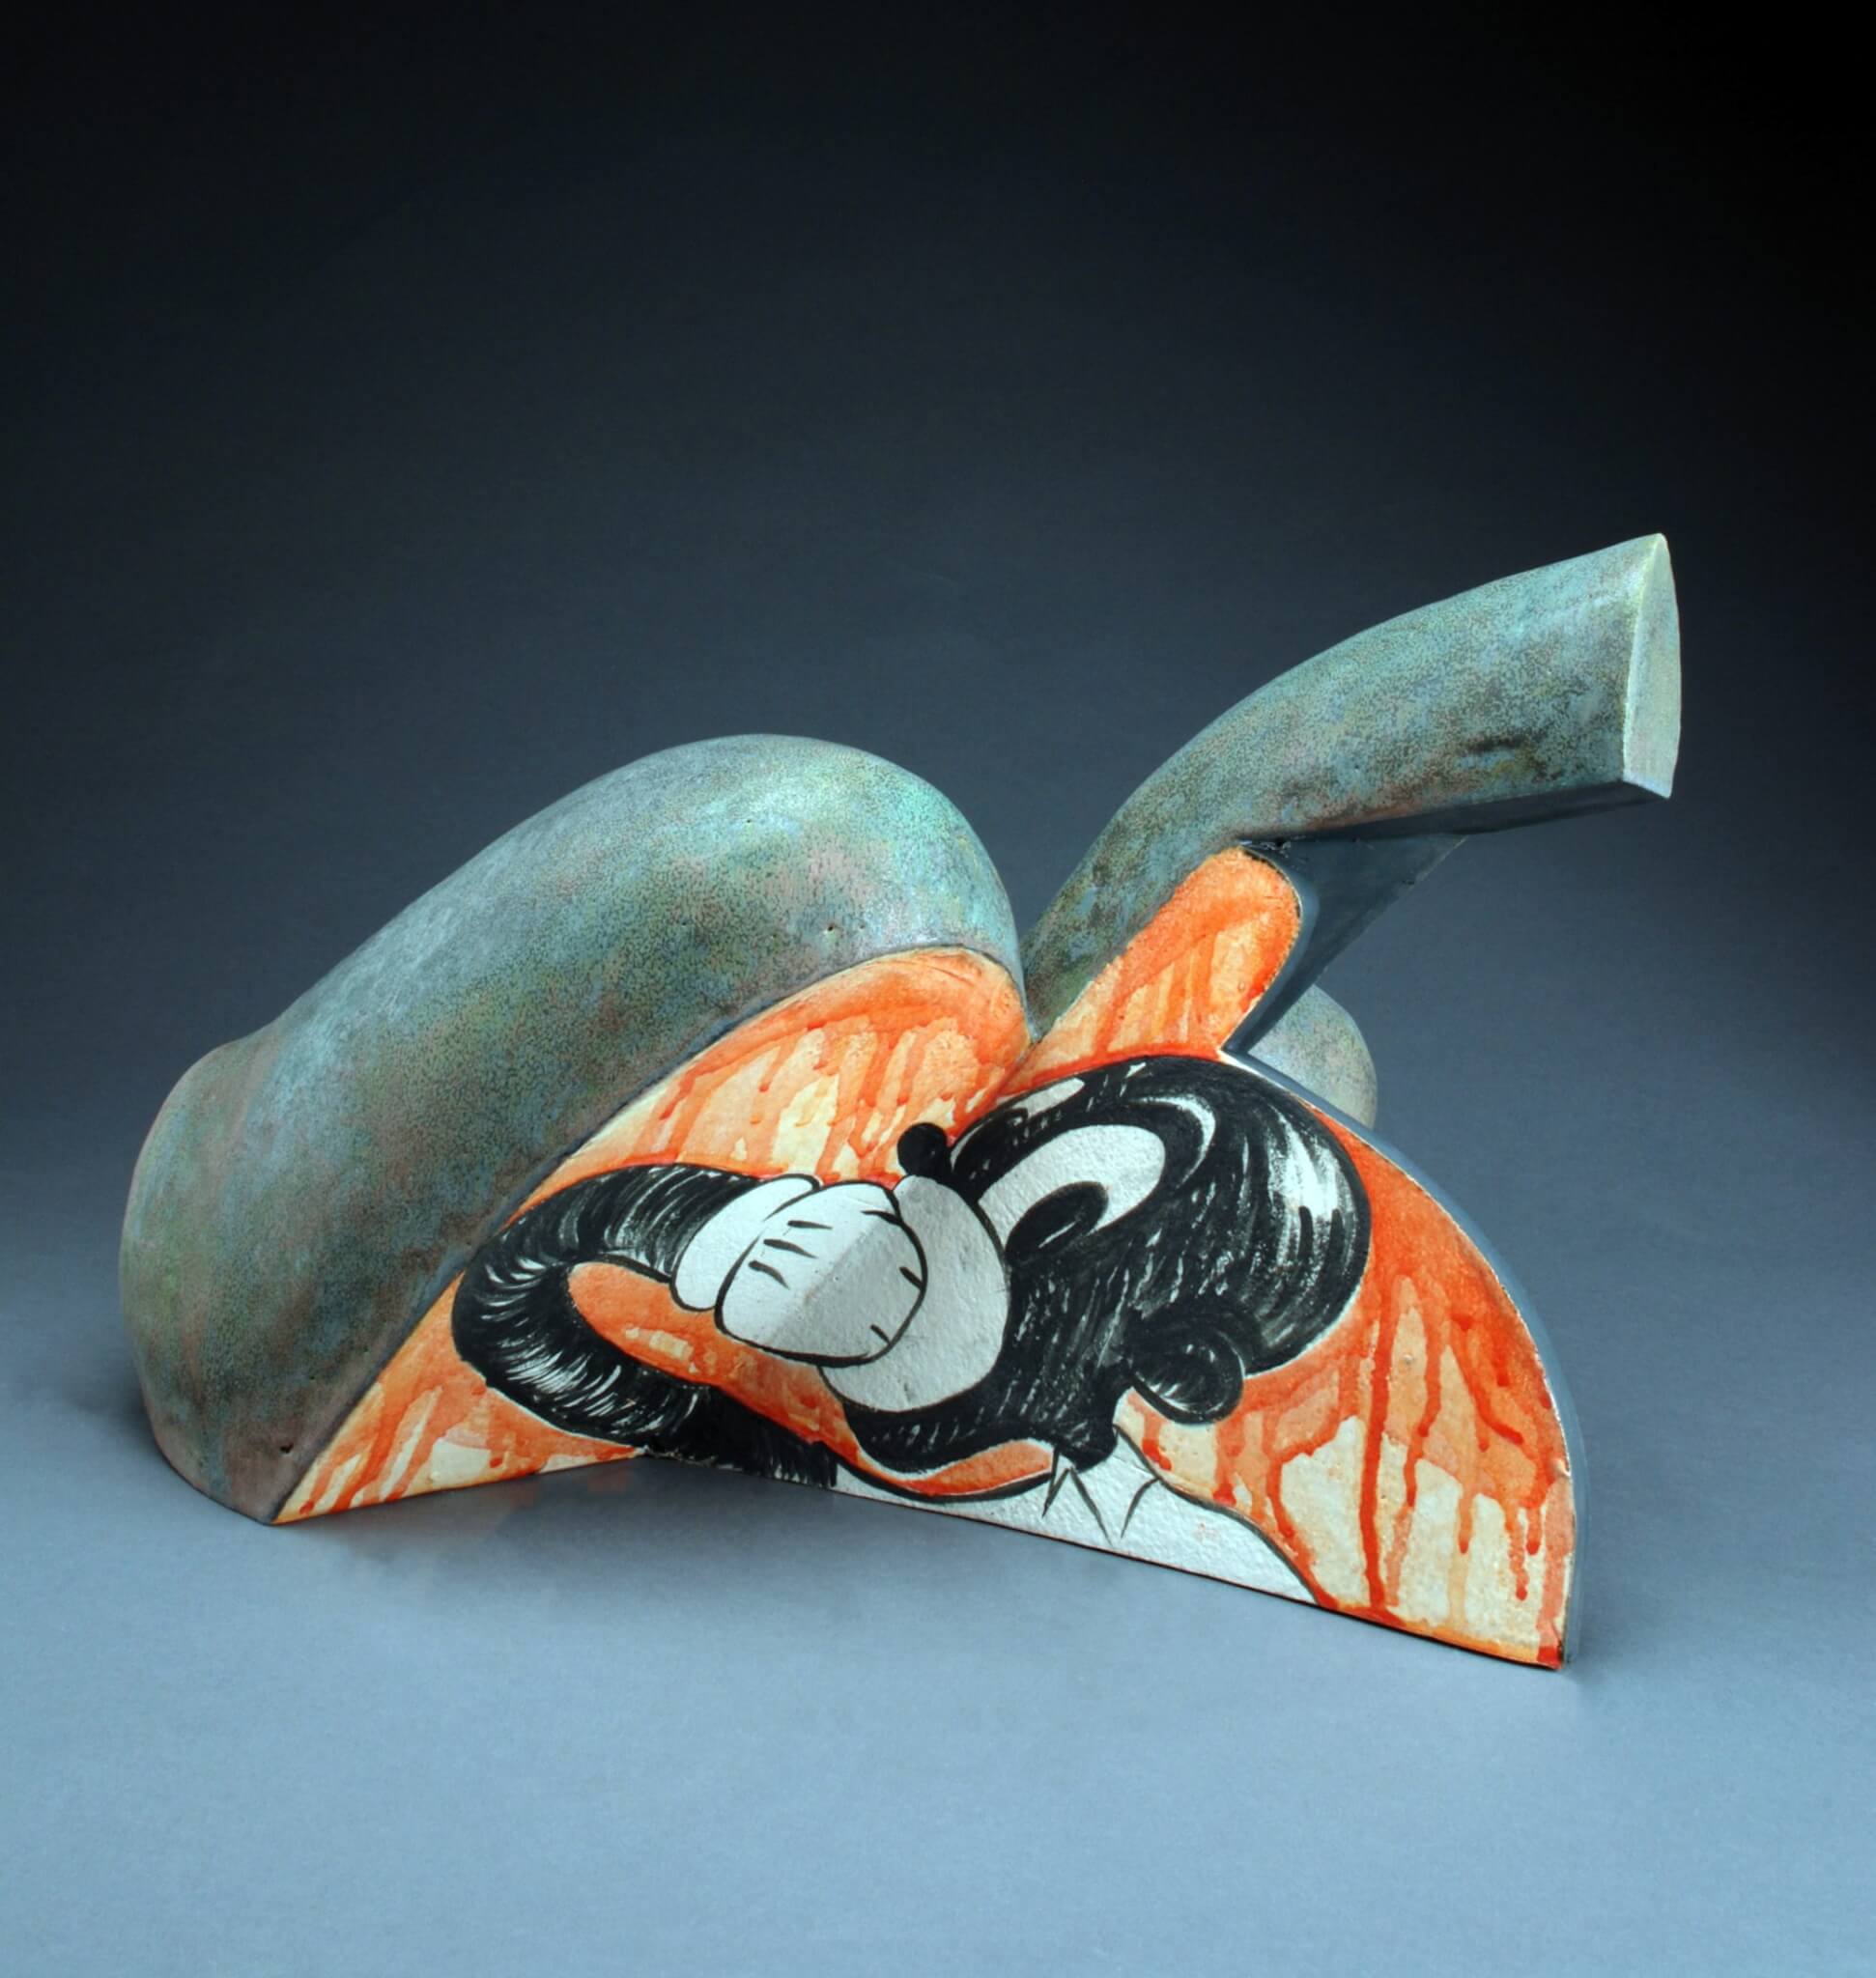 Malcolm Mobutu Smith, Hoof n Mouth, 2010, Stoneware, slip and glaze, 13″ H x 20″ x 15″, Courtesy of the artist.